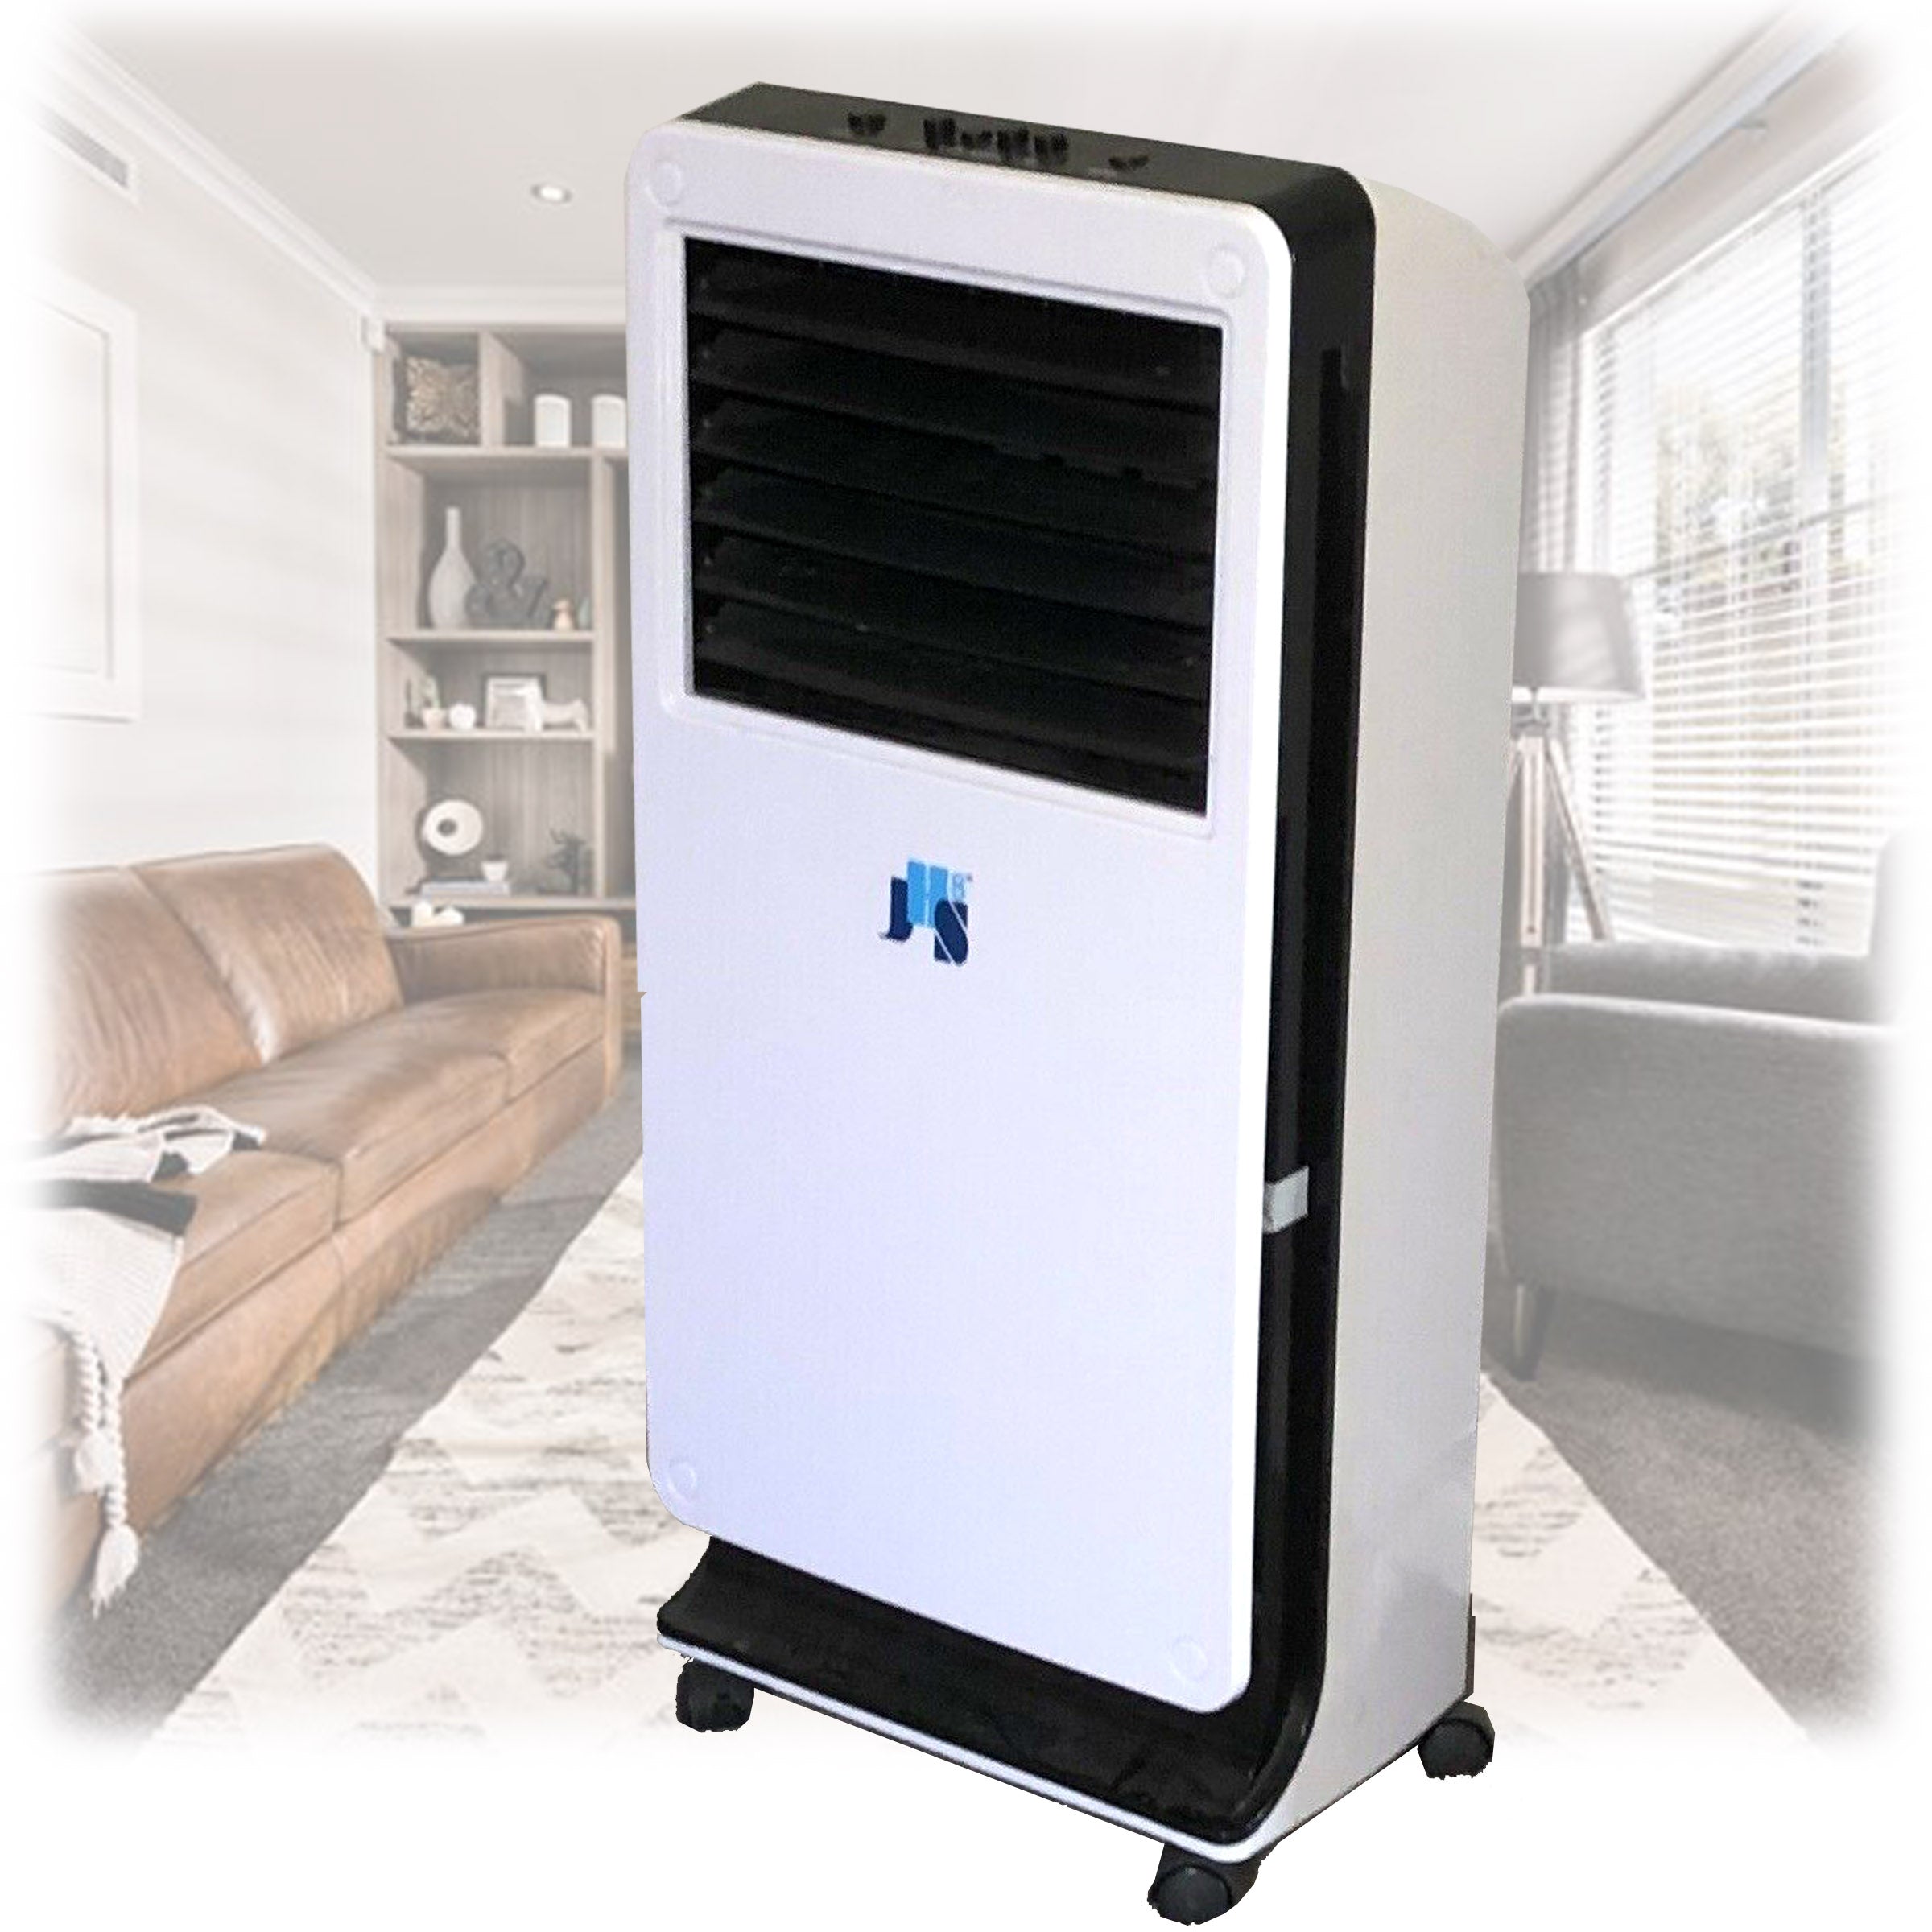 Portable Evaporative Air Cooler 3 in 1 Mist Ice Cooling Fan Humidifier 3.3L Deals499